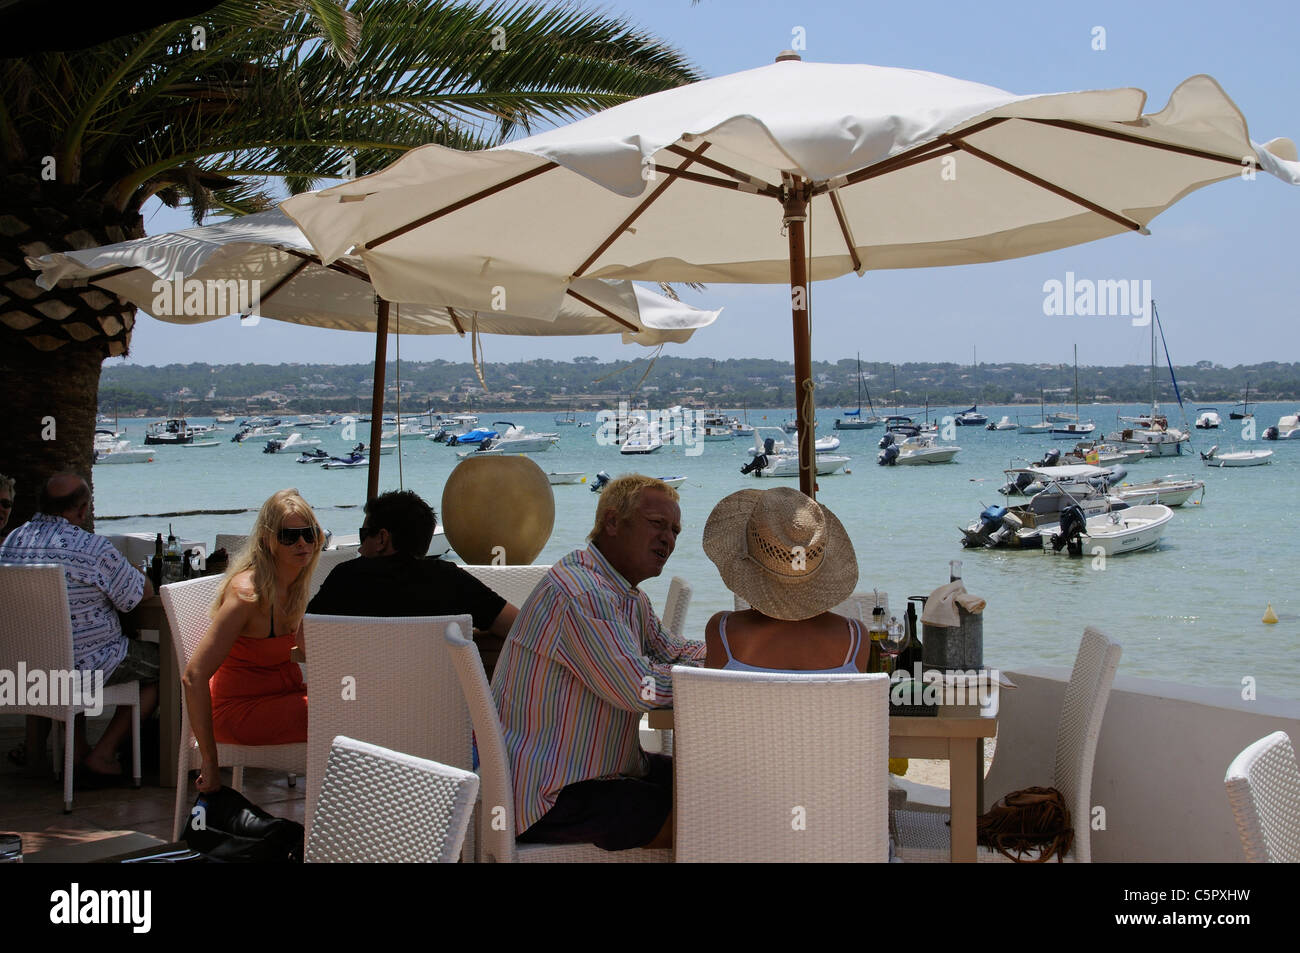 Customers dining in a waterfront restaurant on the Spanish island of Formentera Stock Photo